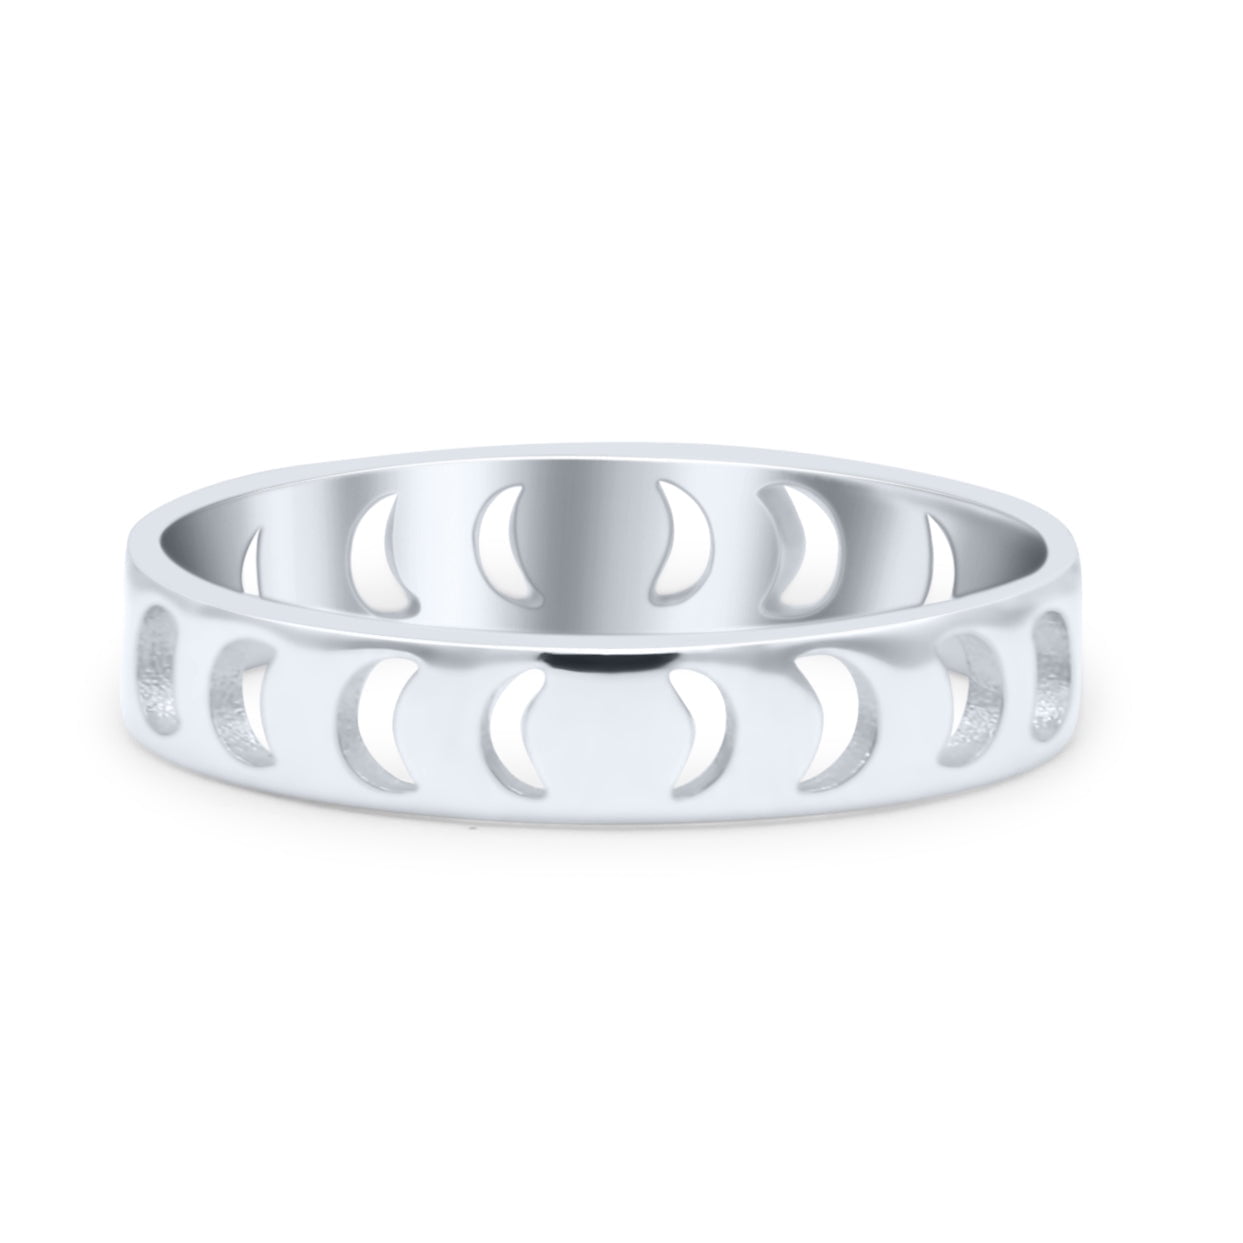 Iconic Celestial Moon Phases Cut Lunar Cycle Ring Band 925 Sterling Silver  Size 8